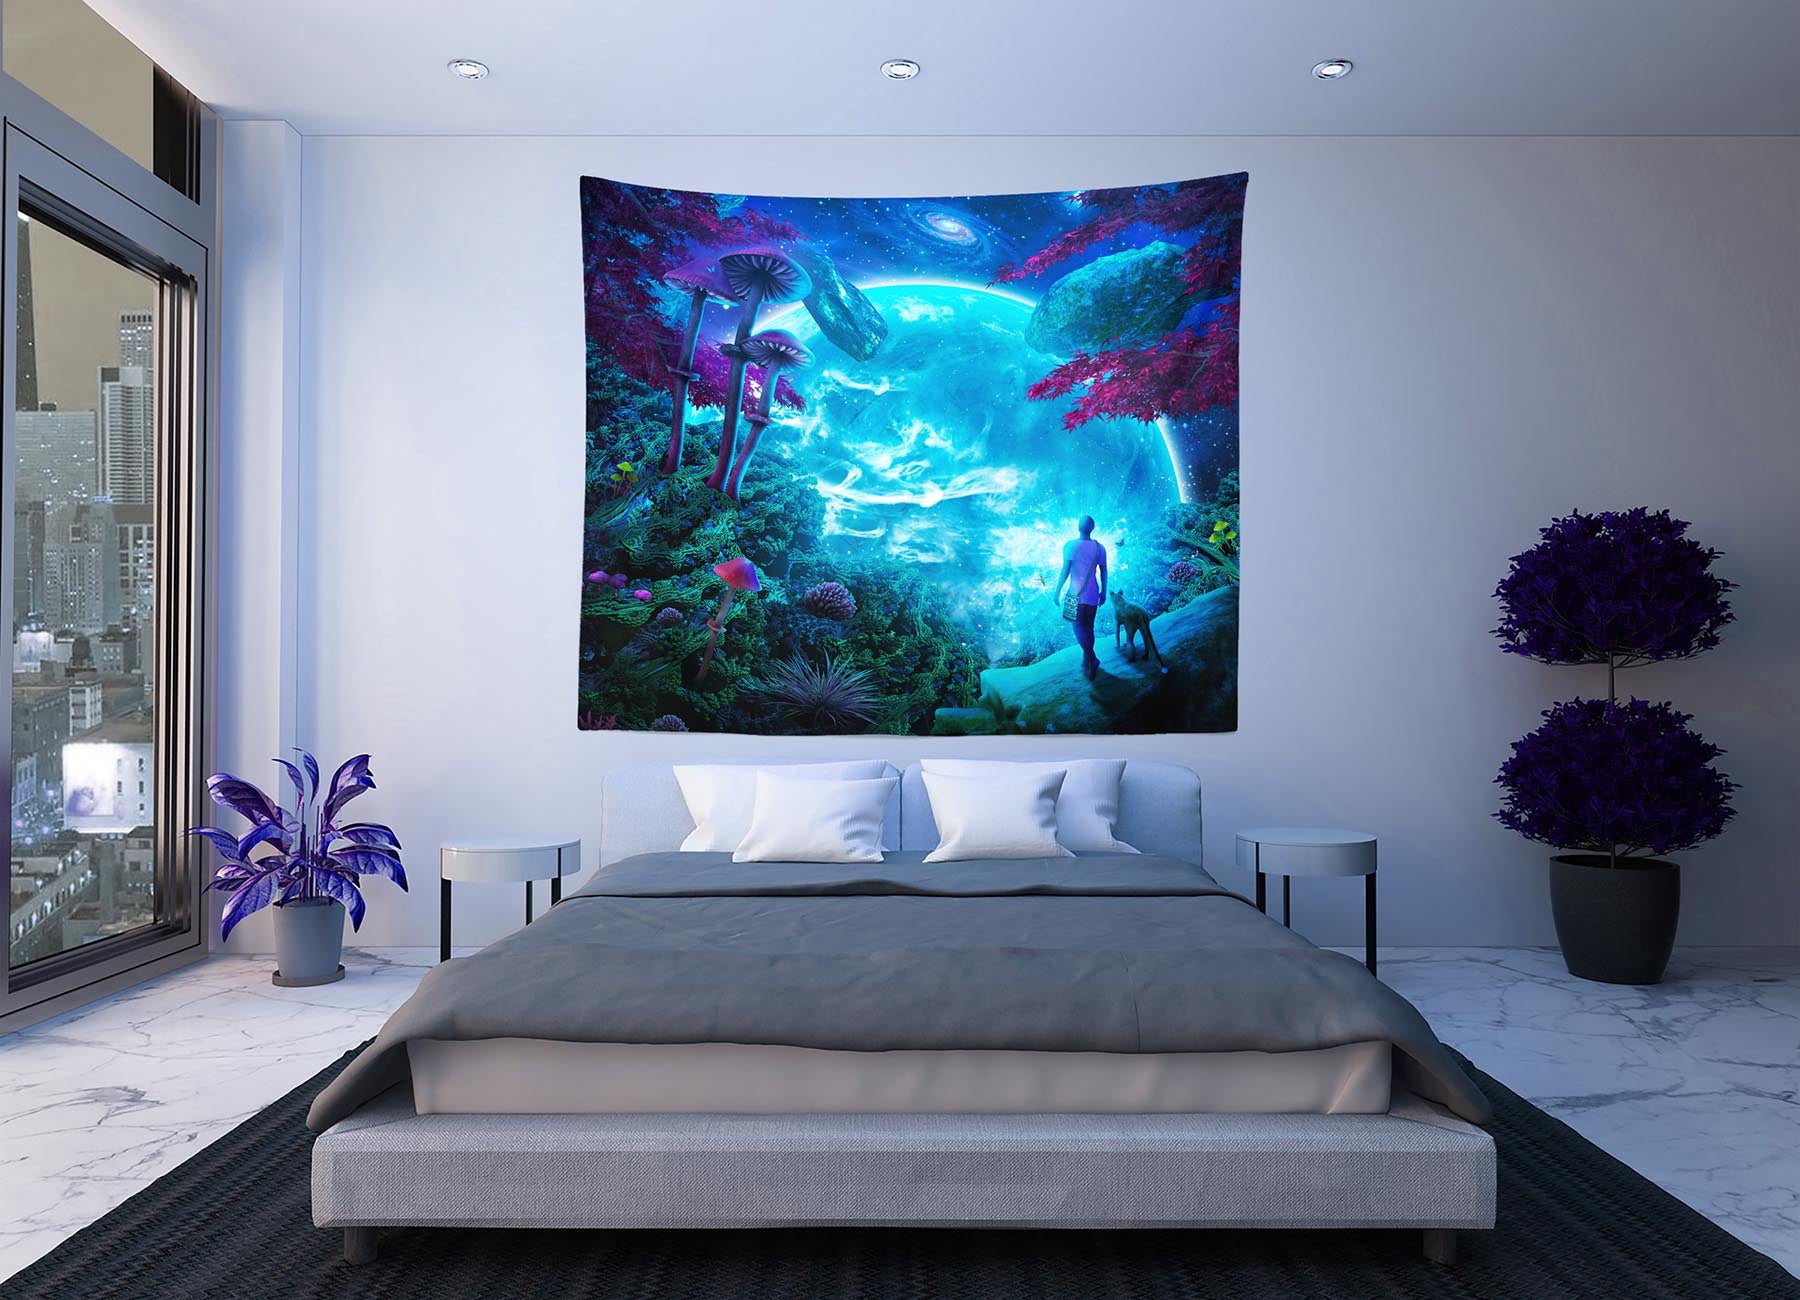 Blue planet with magic mushrooms fantasy art wall tapestry in apartment bedroom